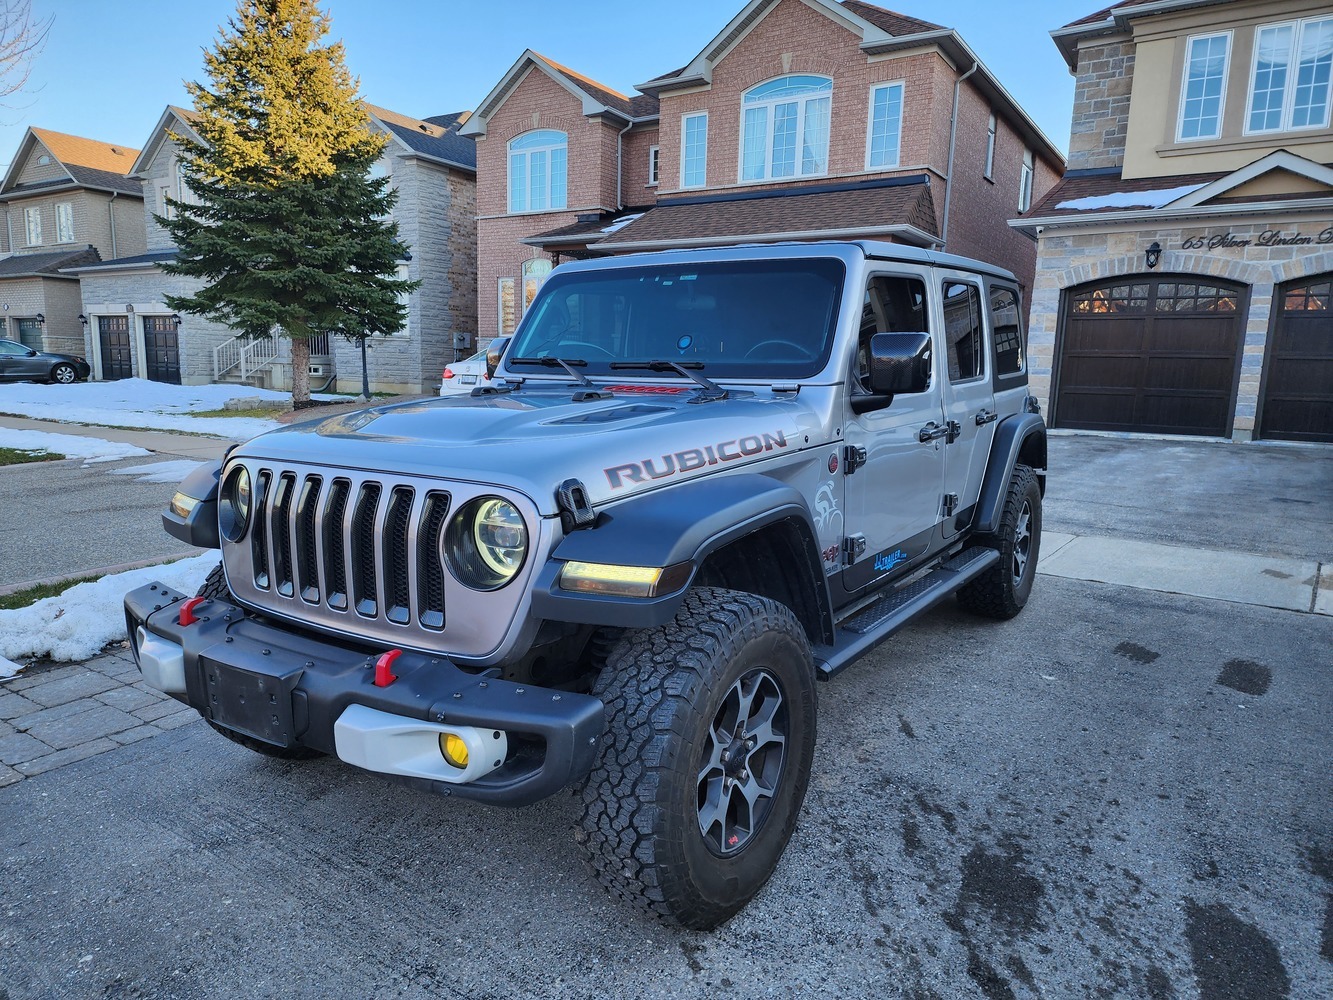 2012-2018 Jeep Wrangler (JK) Used Vehicle Review 